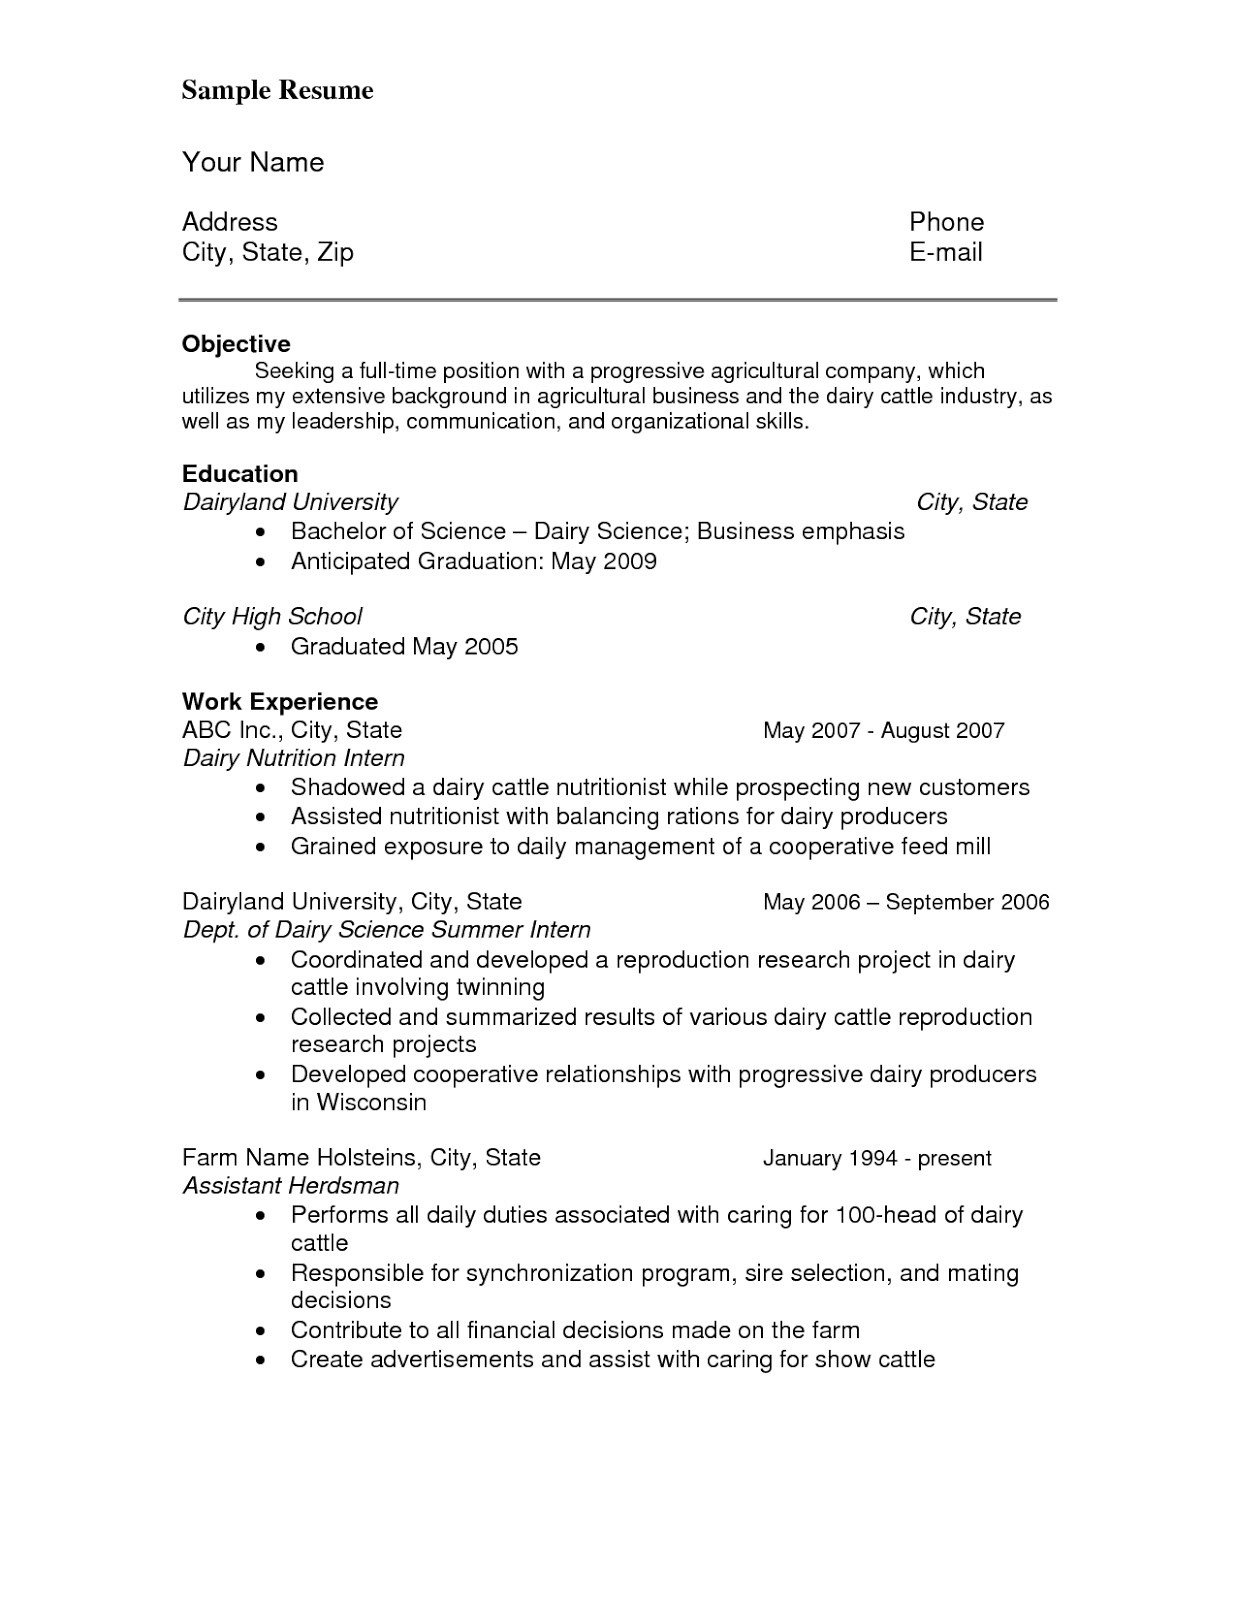 Resume Reference Page Template References for Resume Sample